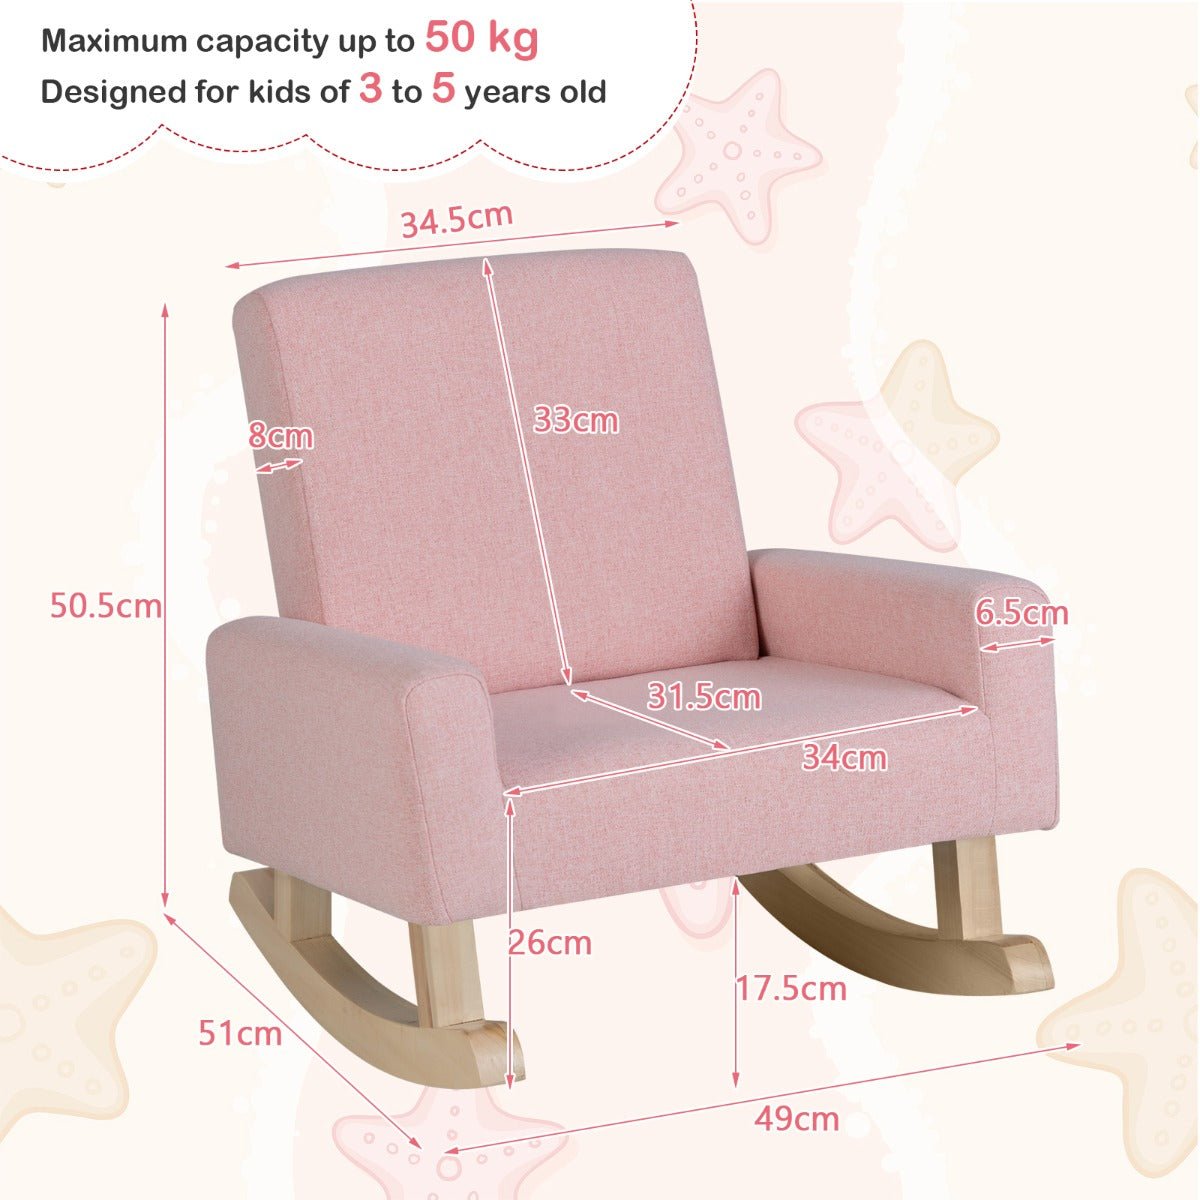 Rocking Chair for Kids - Pink, Wood Legs, Anti-tipping Design for Safe Fun